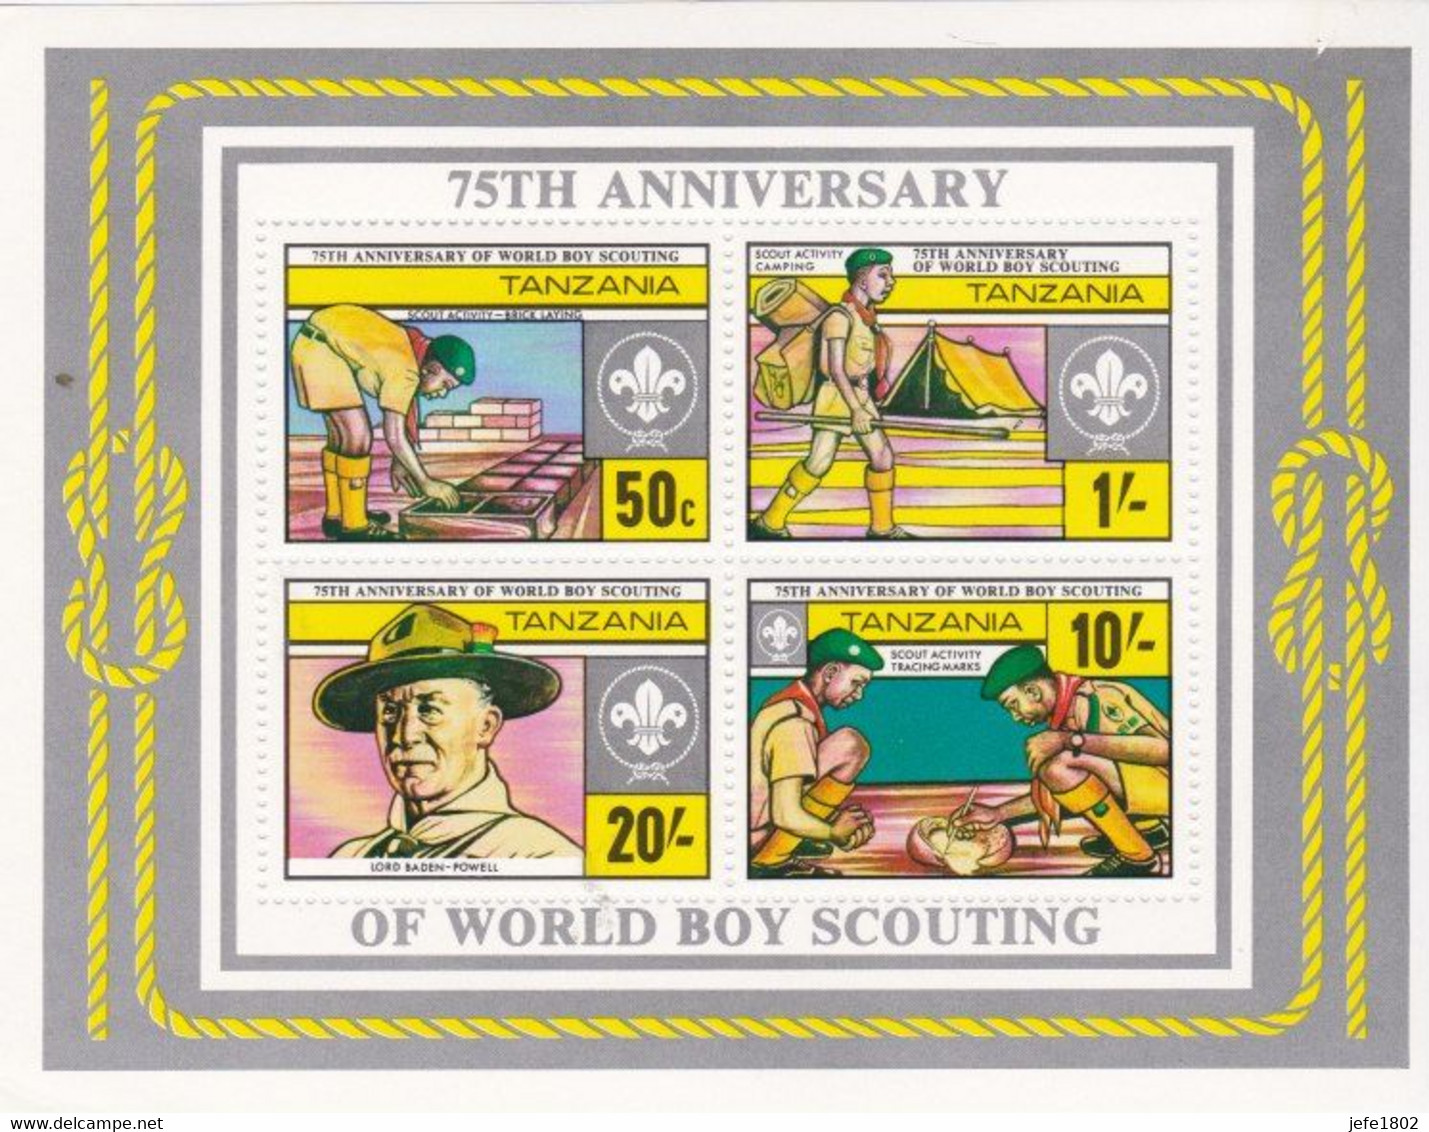 75th Anniversary Of World Boy Scouting On Leaflet - Tanzania (1964-...)